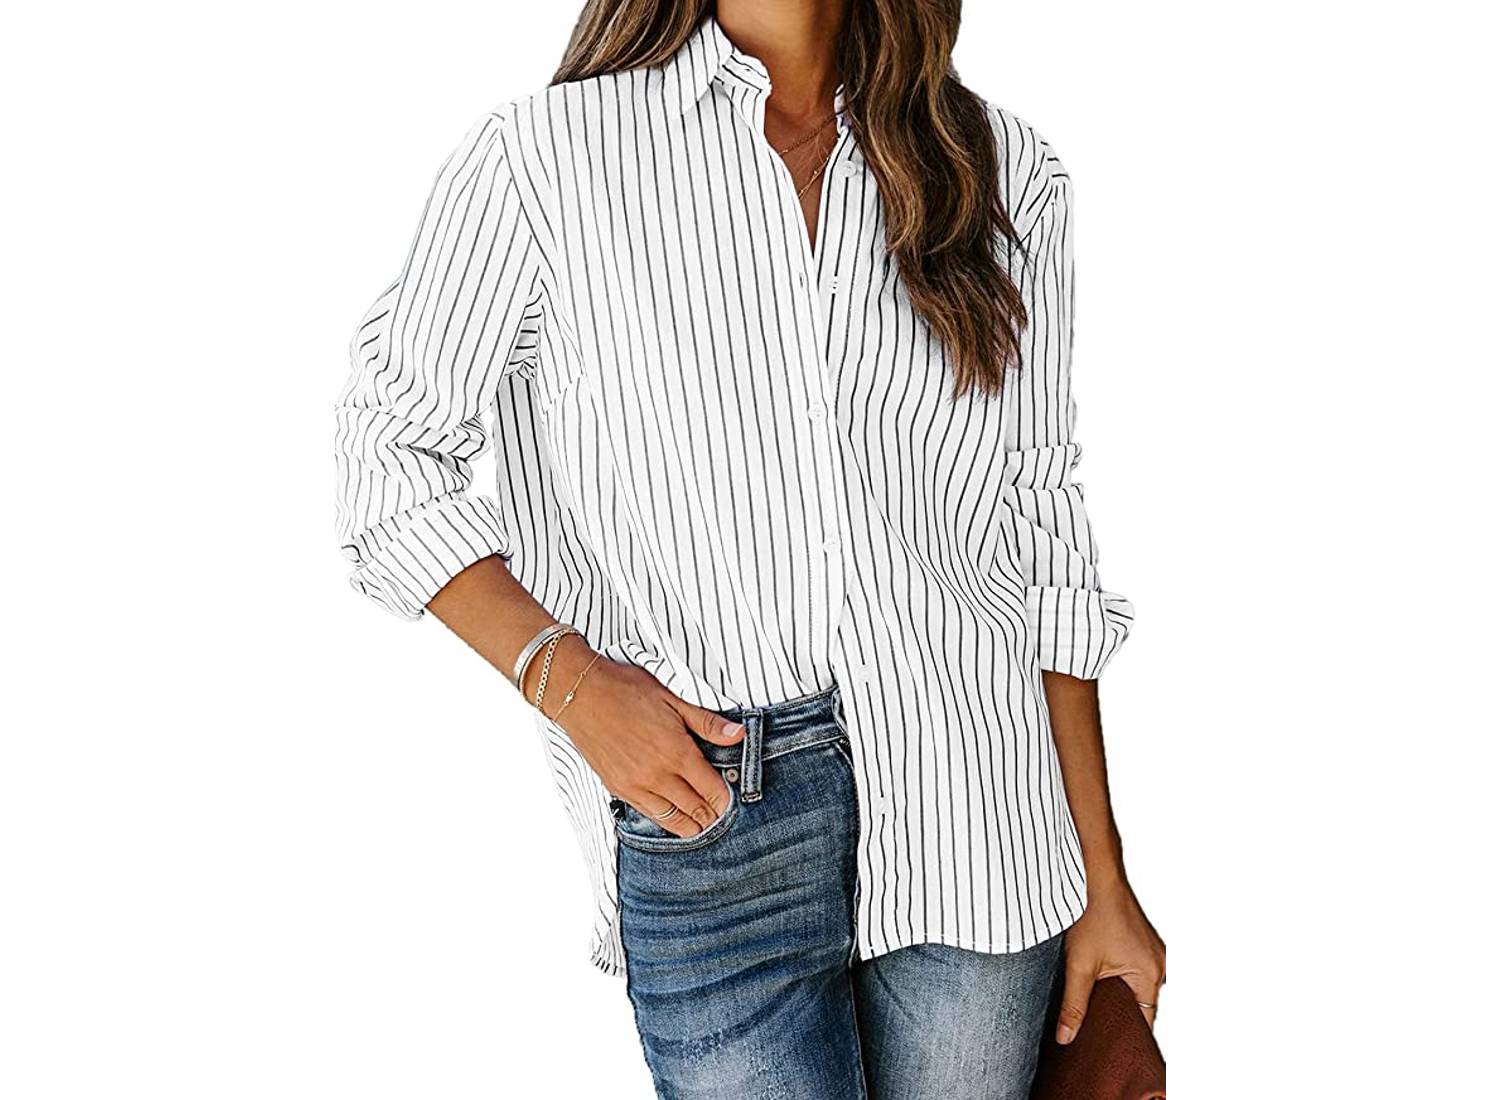 Woman wearing white button-up shirt with black pinstripes and a pair of jeans